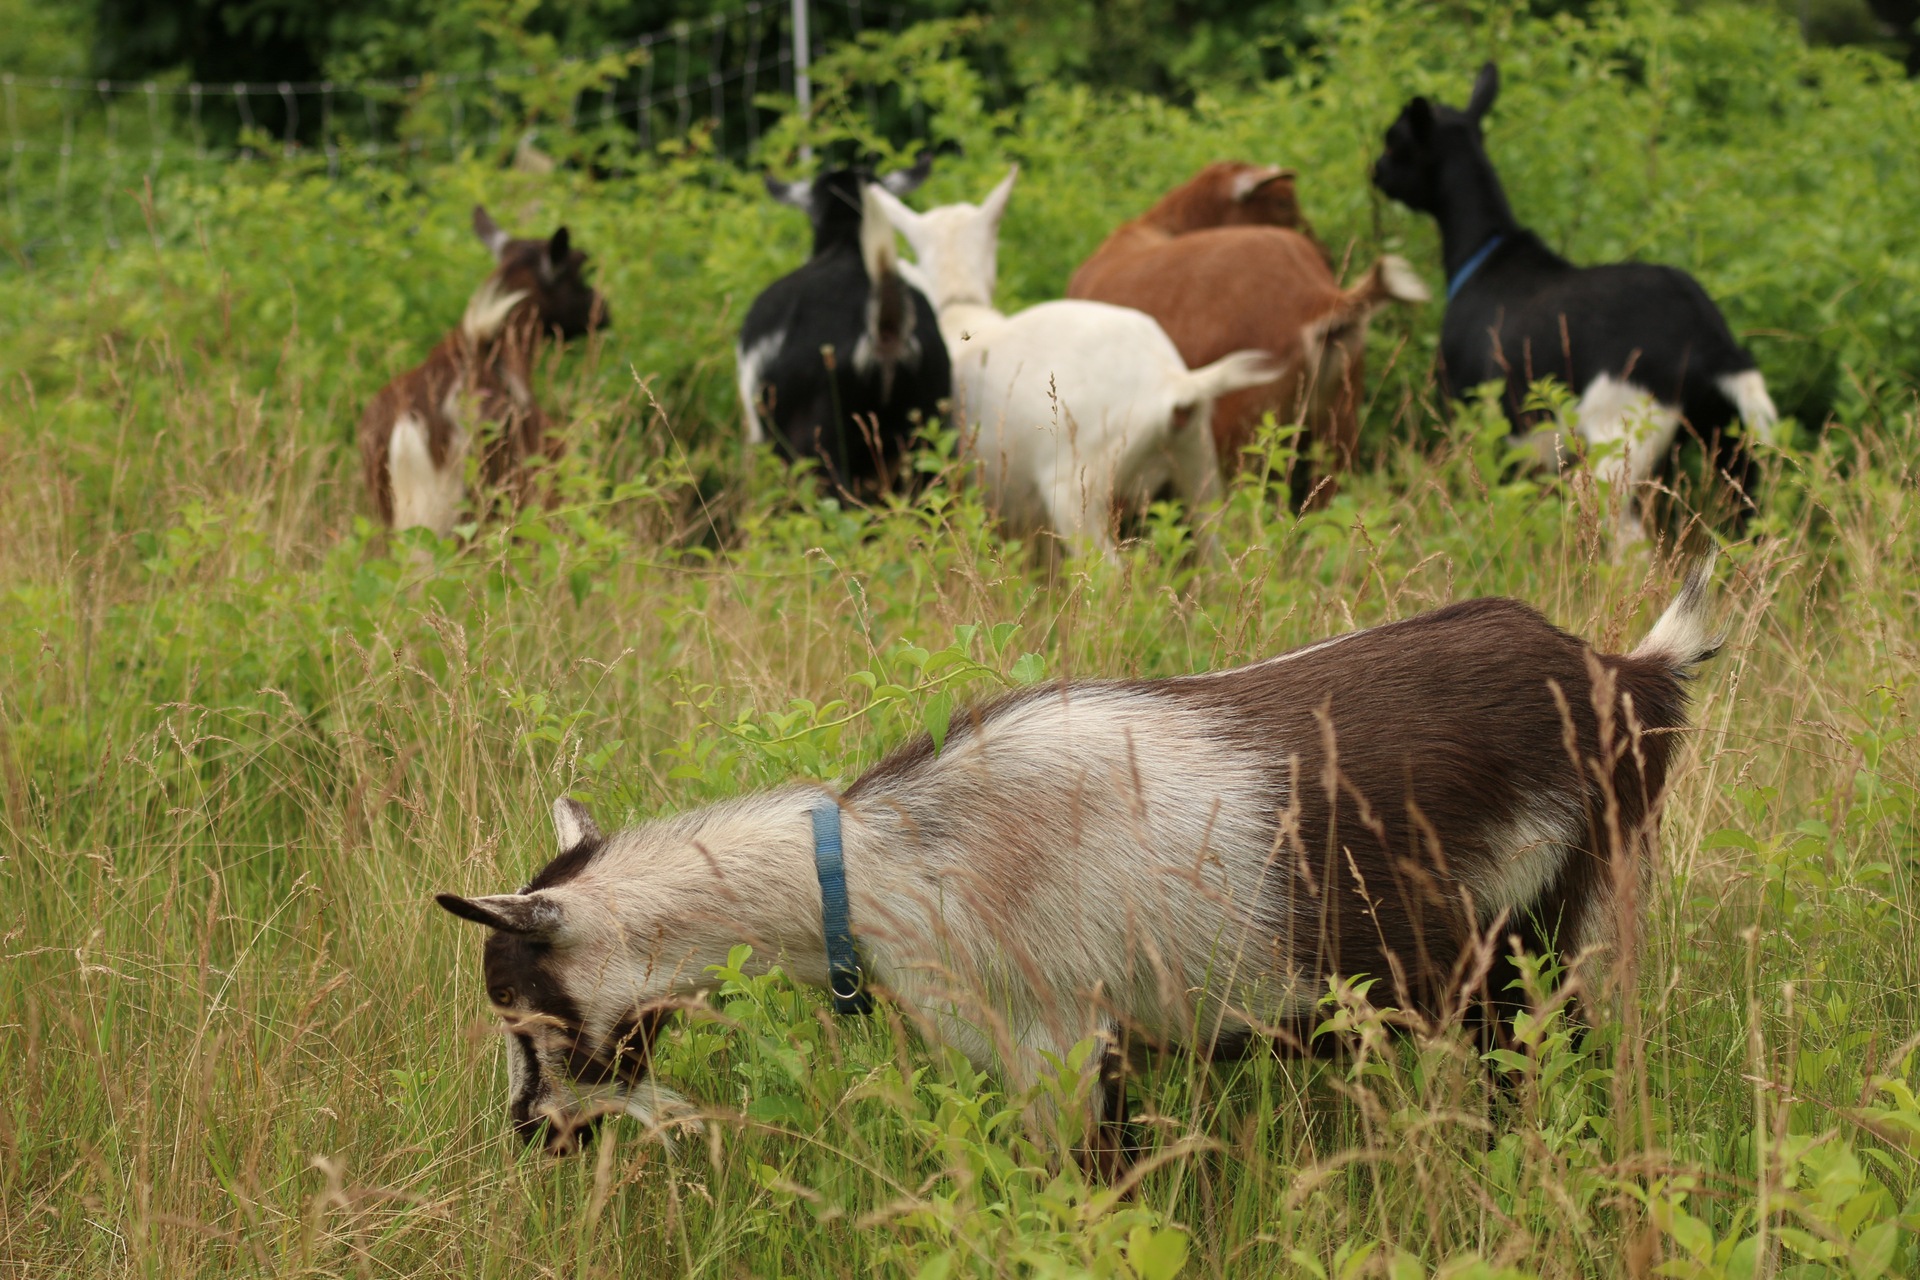 Multi-colored goats munching on grass in a meadow.